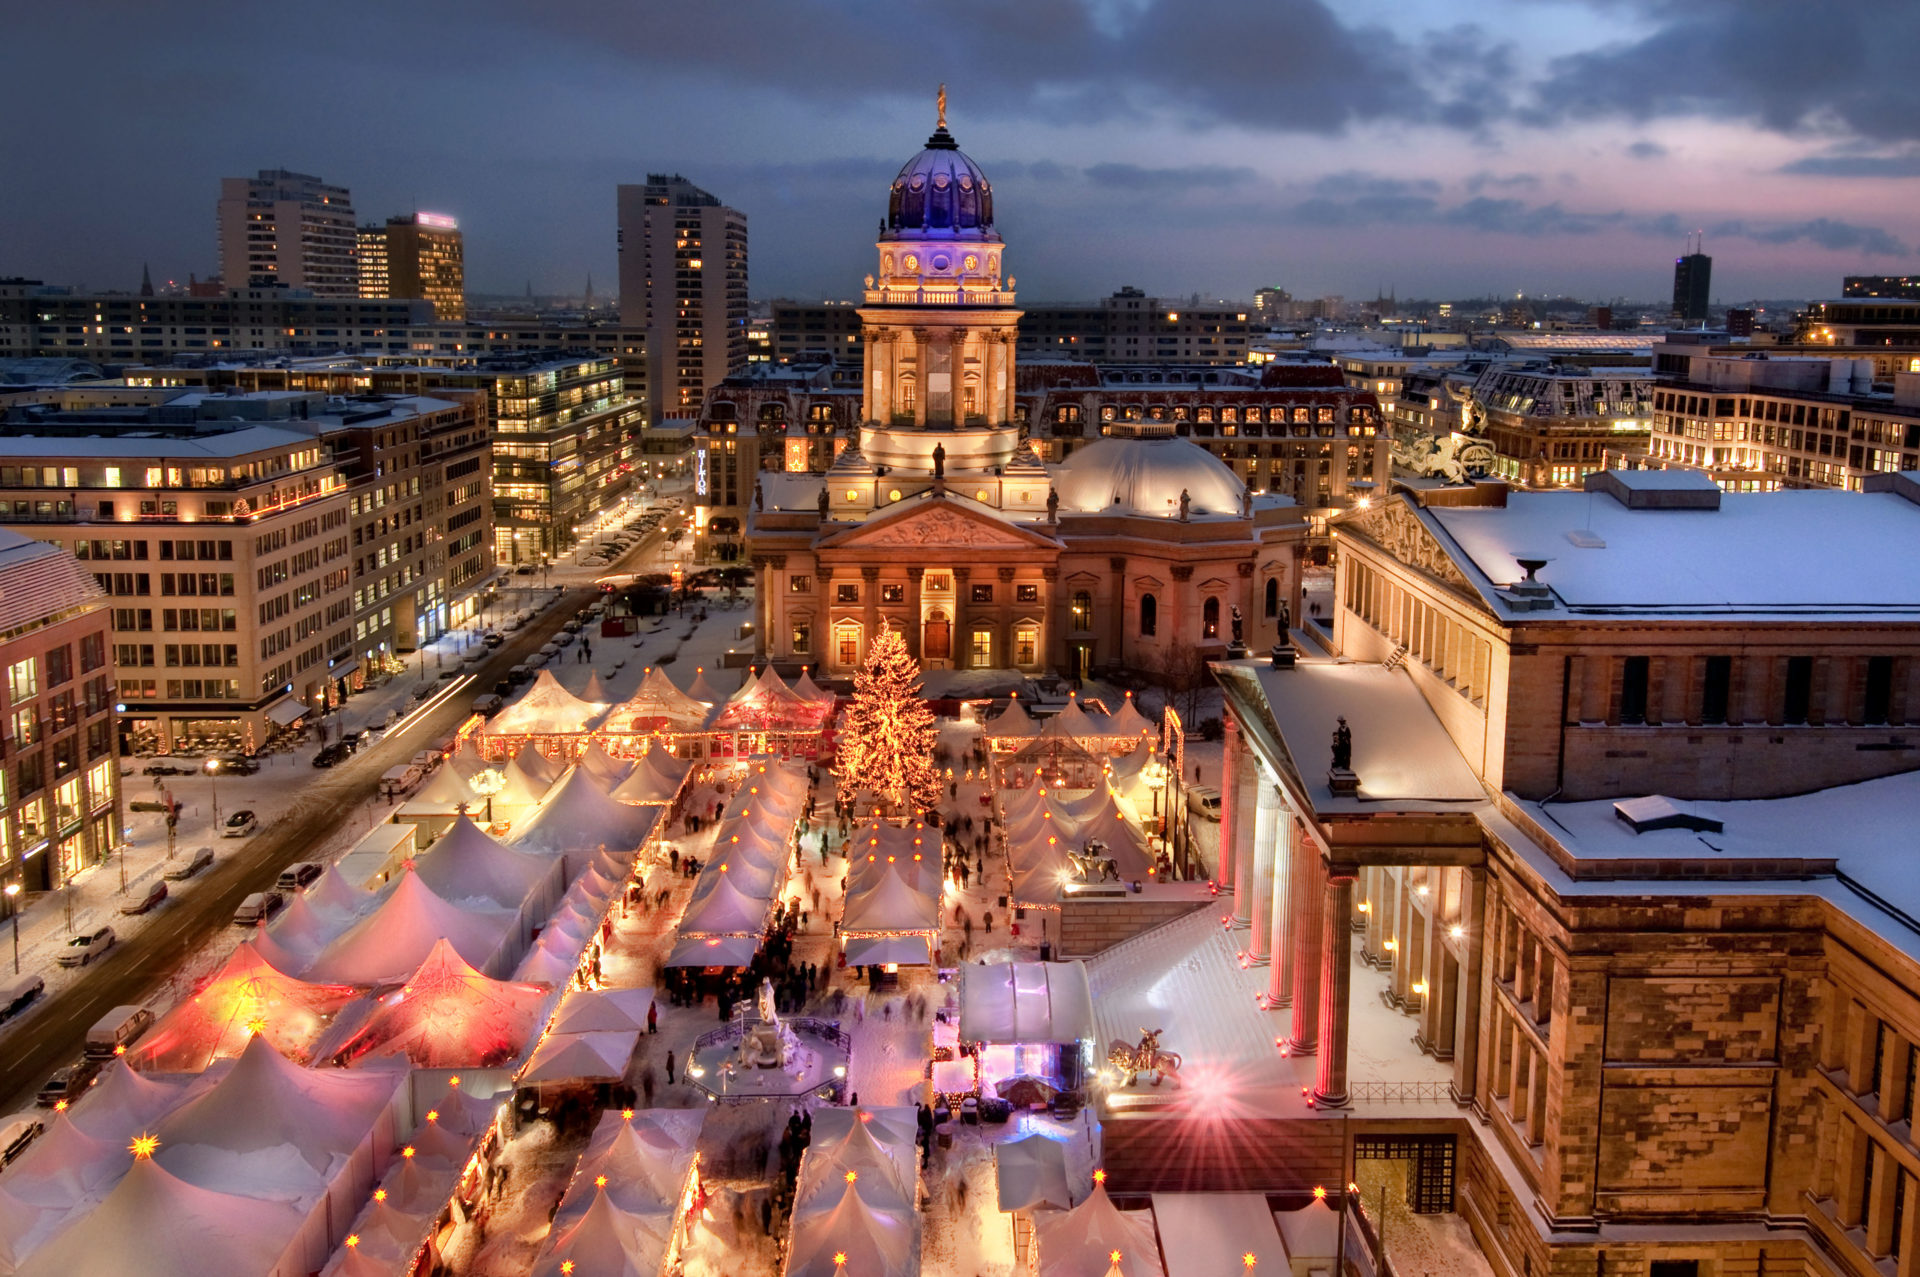 A Christmas market is seen from above in Berlin, Germany in December 2010